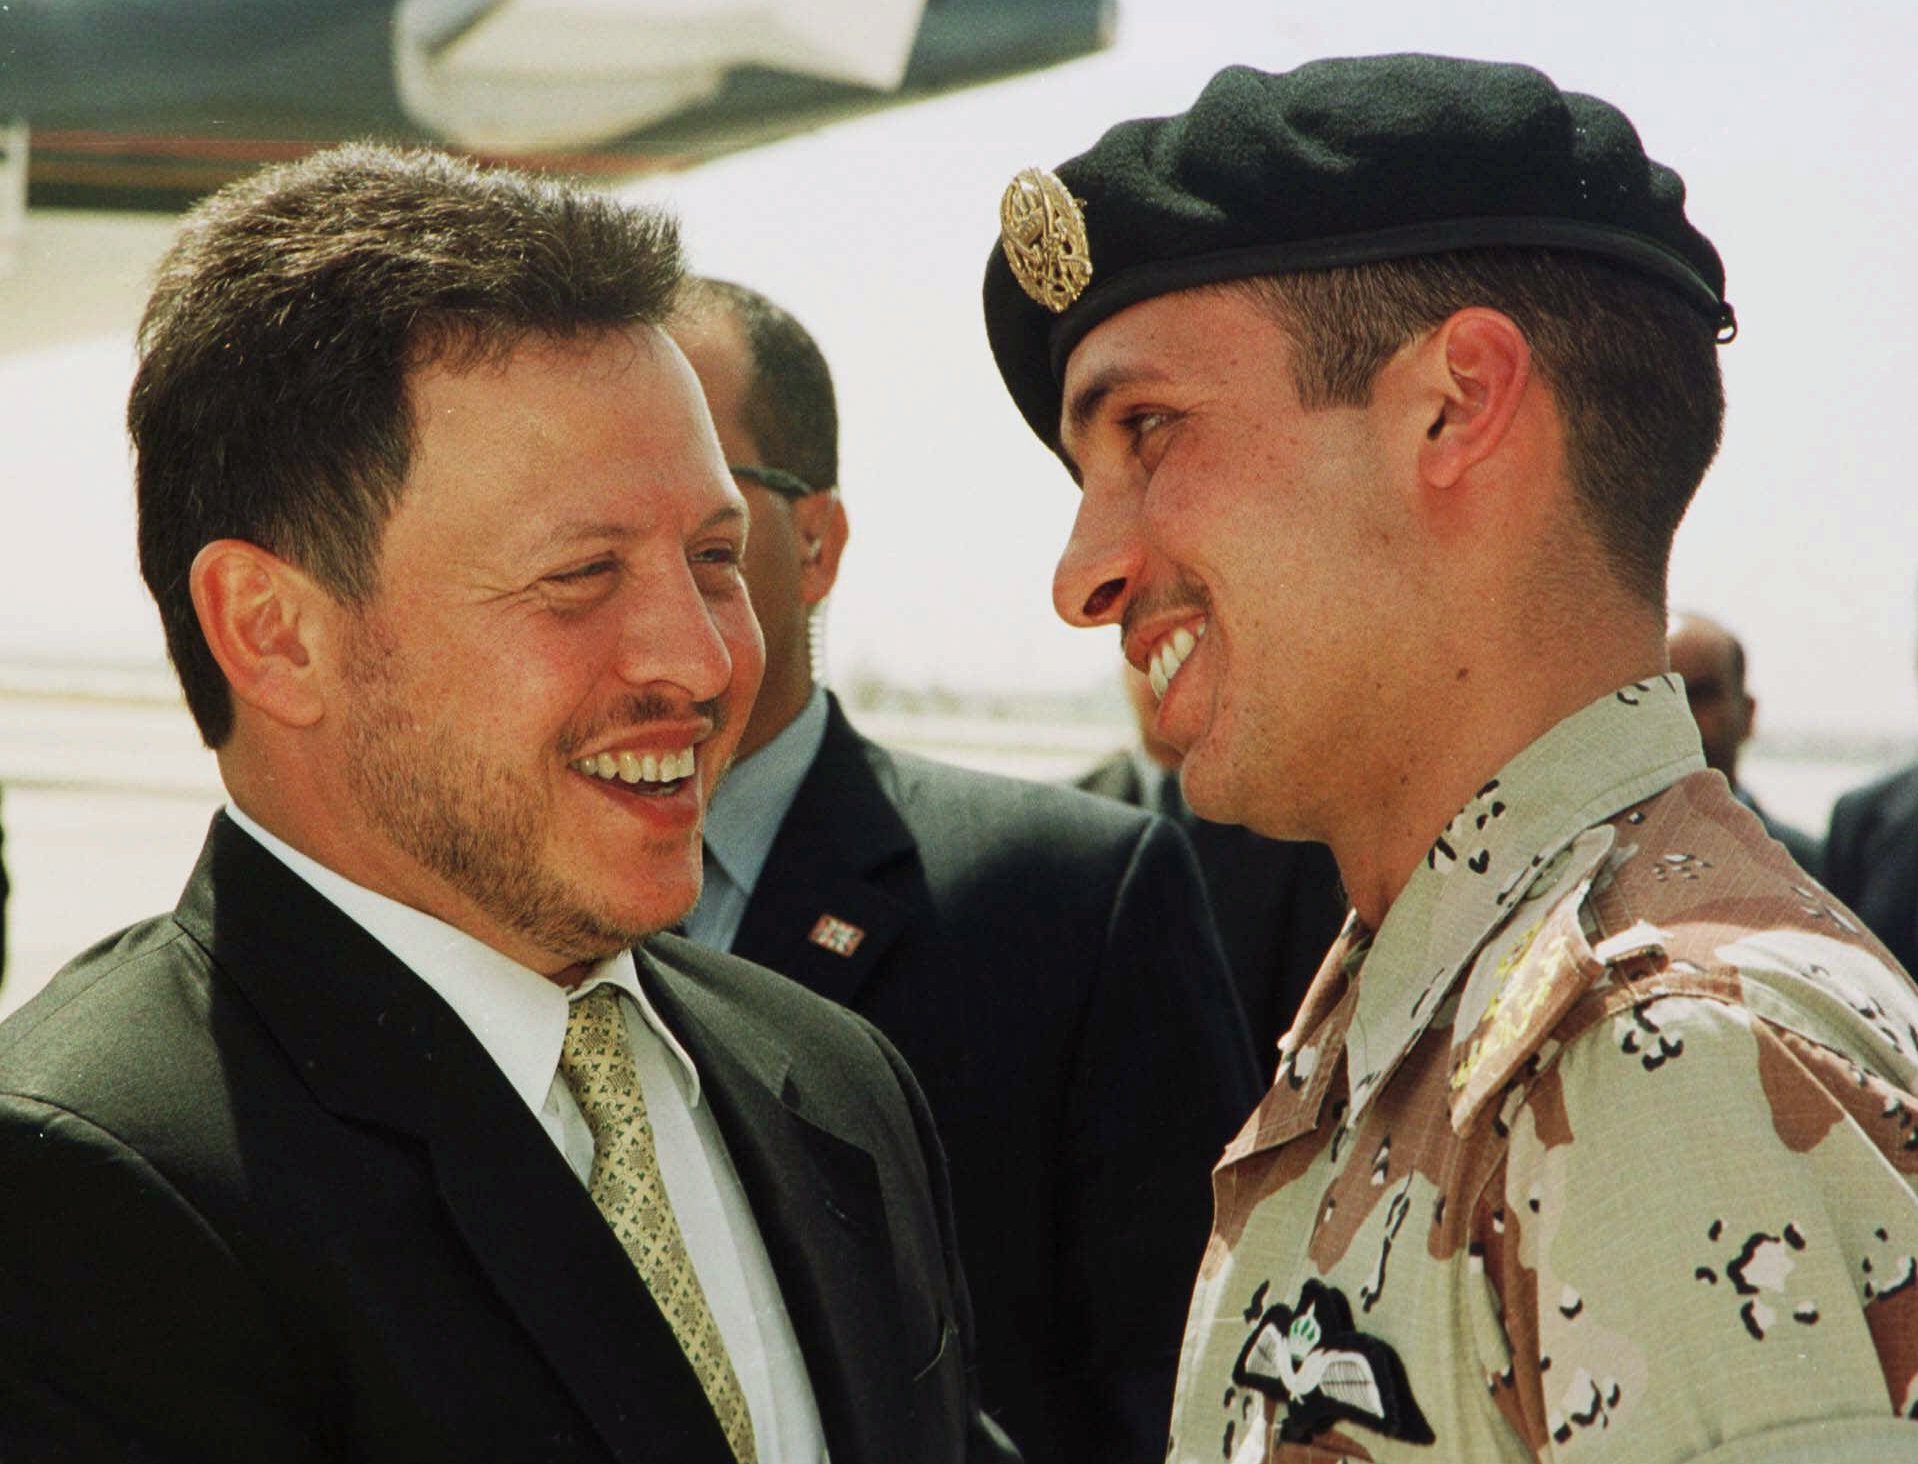 Jordan: King's half-brother was part of plot' threatening security | The of Israel